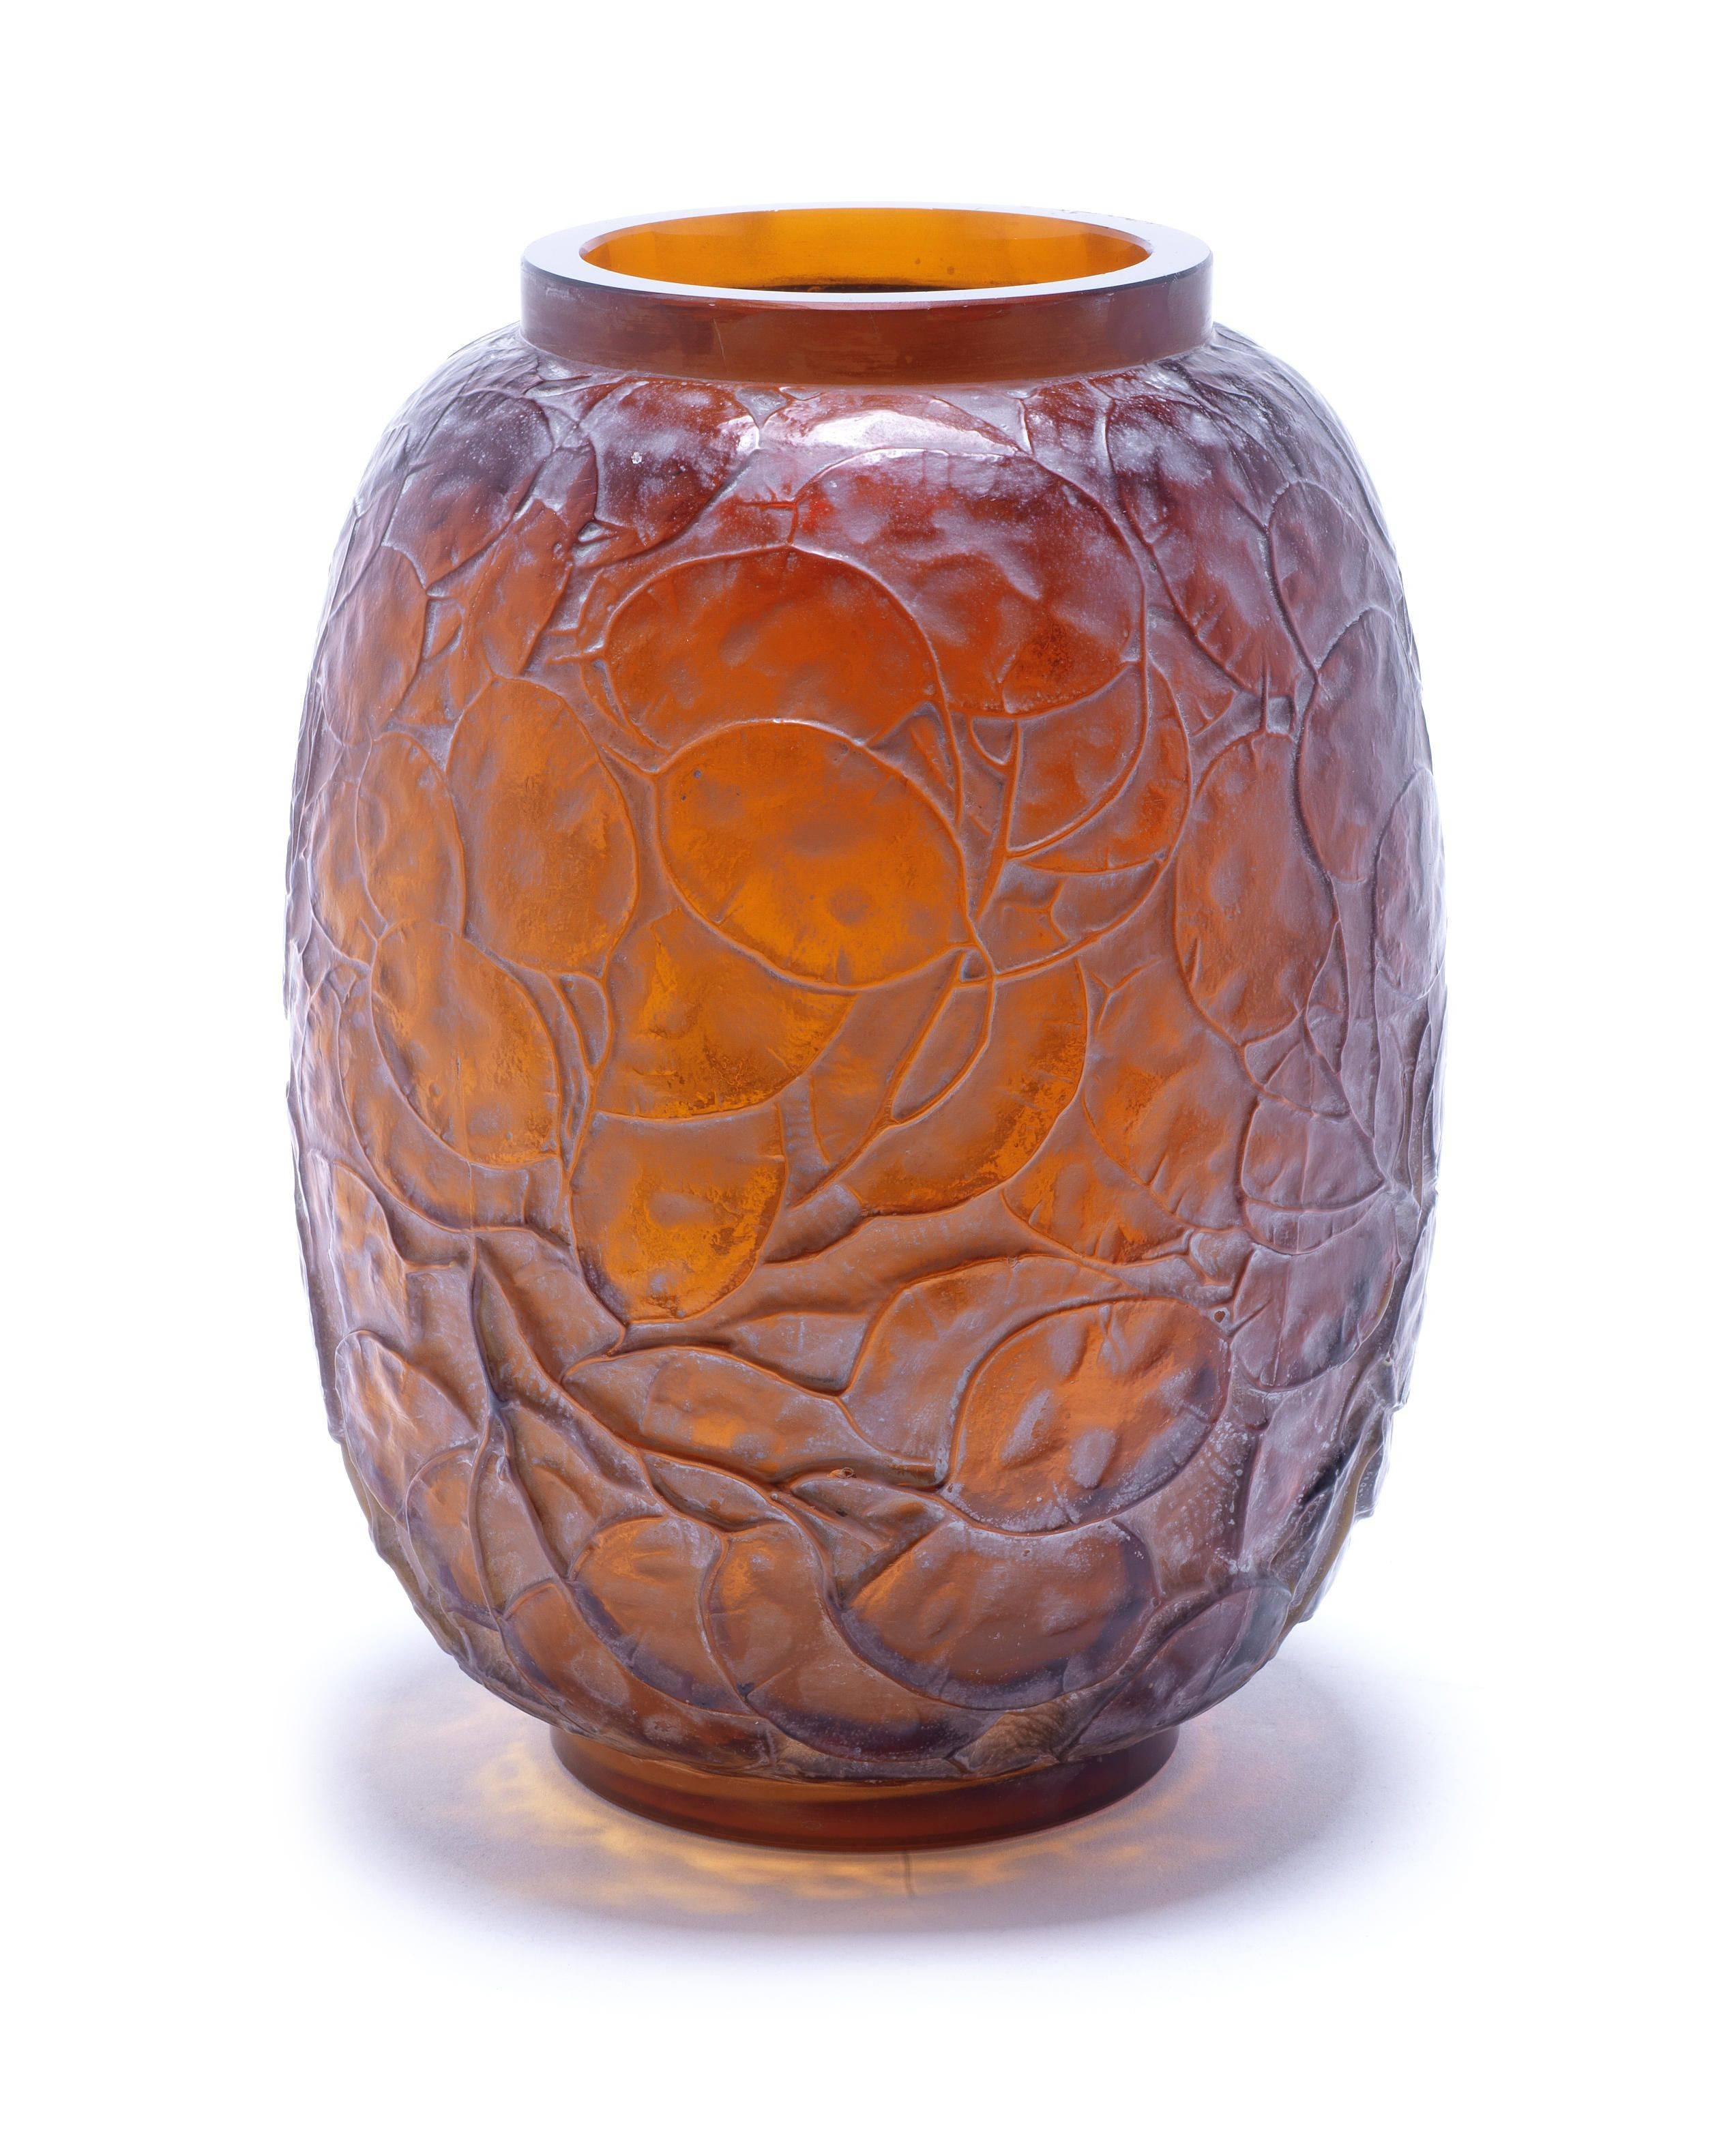 20 Elegant Lalique Vases Images 2024 free download lalique vases images of rena lalique monnaie du pape a vase design 1914 amber glass intended for rena lalique monnaie du pape a vase design 1914 amber glass frosted and heightened with white